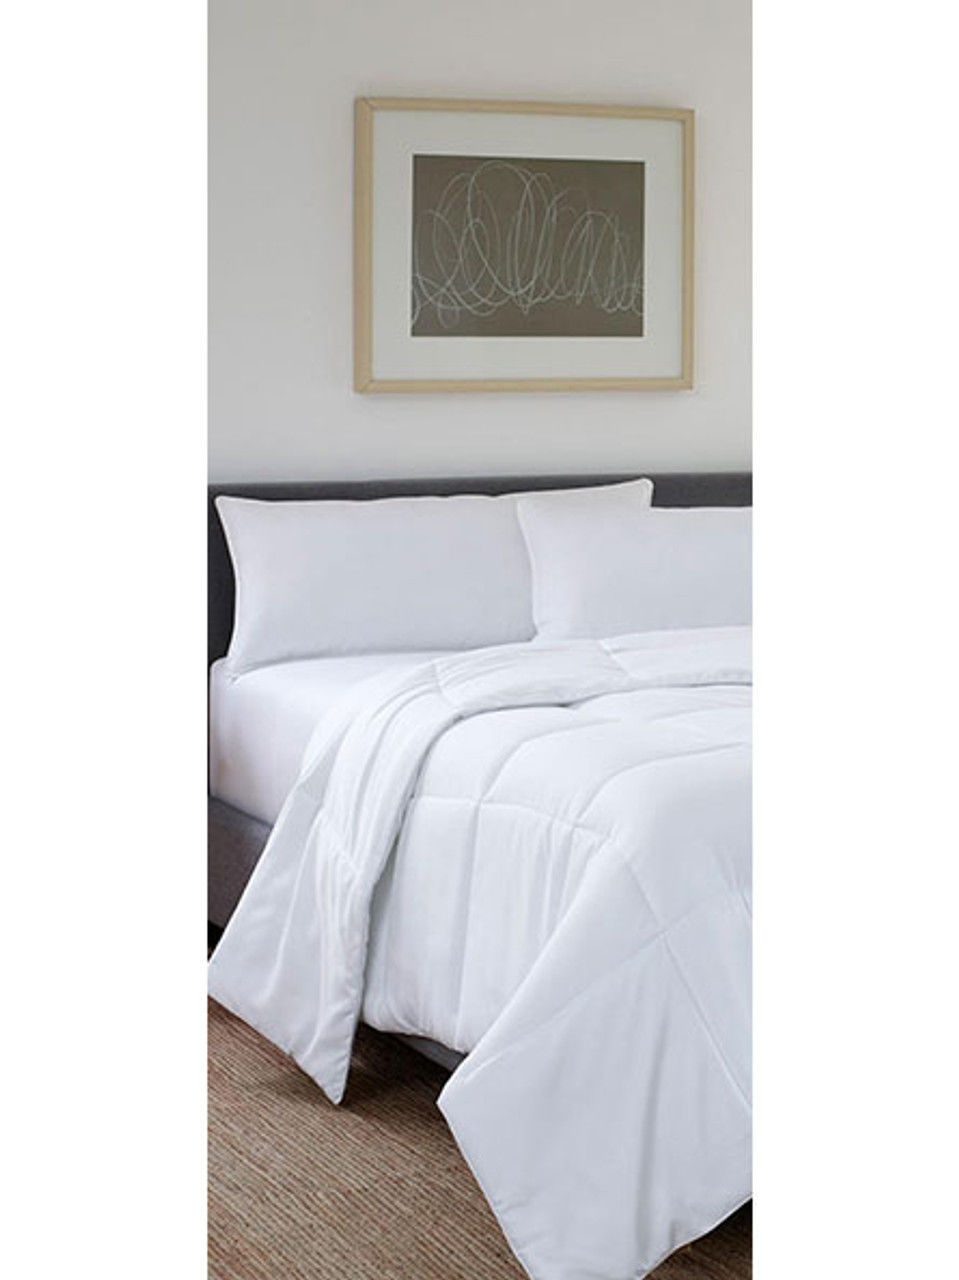 What's the thread count of the alternative down pillow's cotton cover?